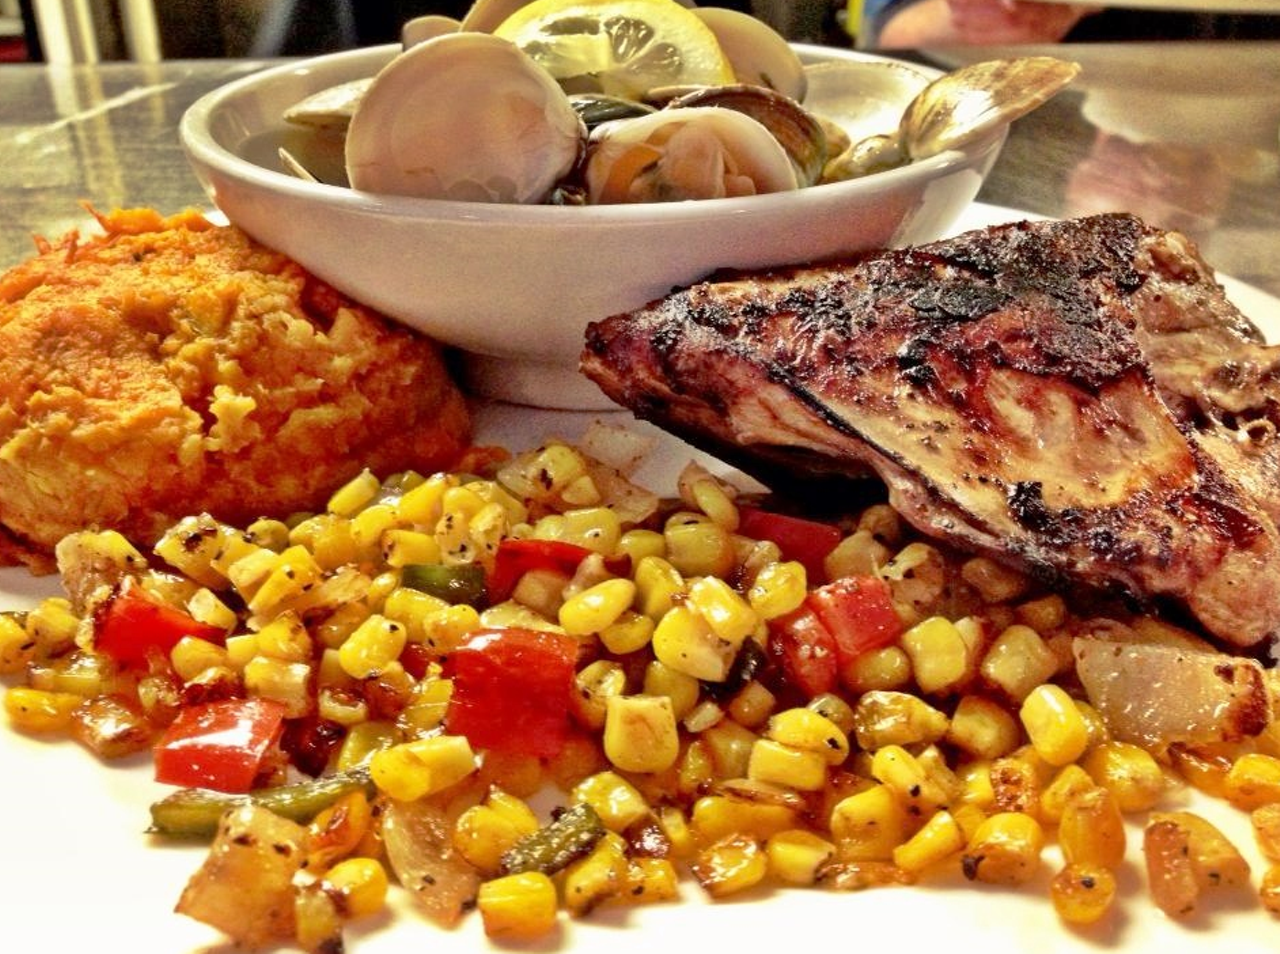 When: Every Saturday in October from 4 p.m. – 10 p.m.
Menu: 1 lb. of clams, mesquite chicken, mashed sweet potatoes, southwest corn, and homemade bread (substitute an eight-ounce steak for $3.99).
Price: $17.00
No reservations required. Find Grumpy’s at 2621 W 14th Street, Tremont, and at (216) 241-5025.